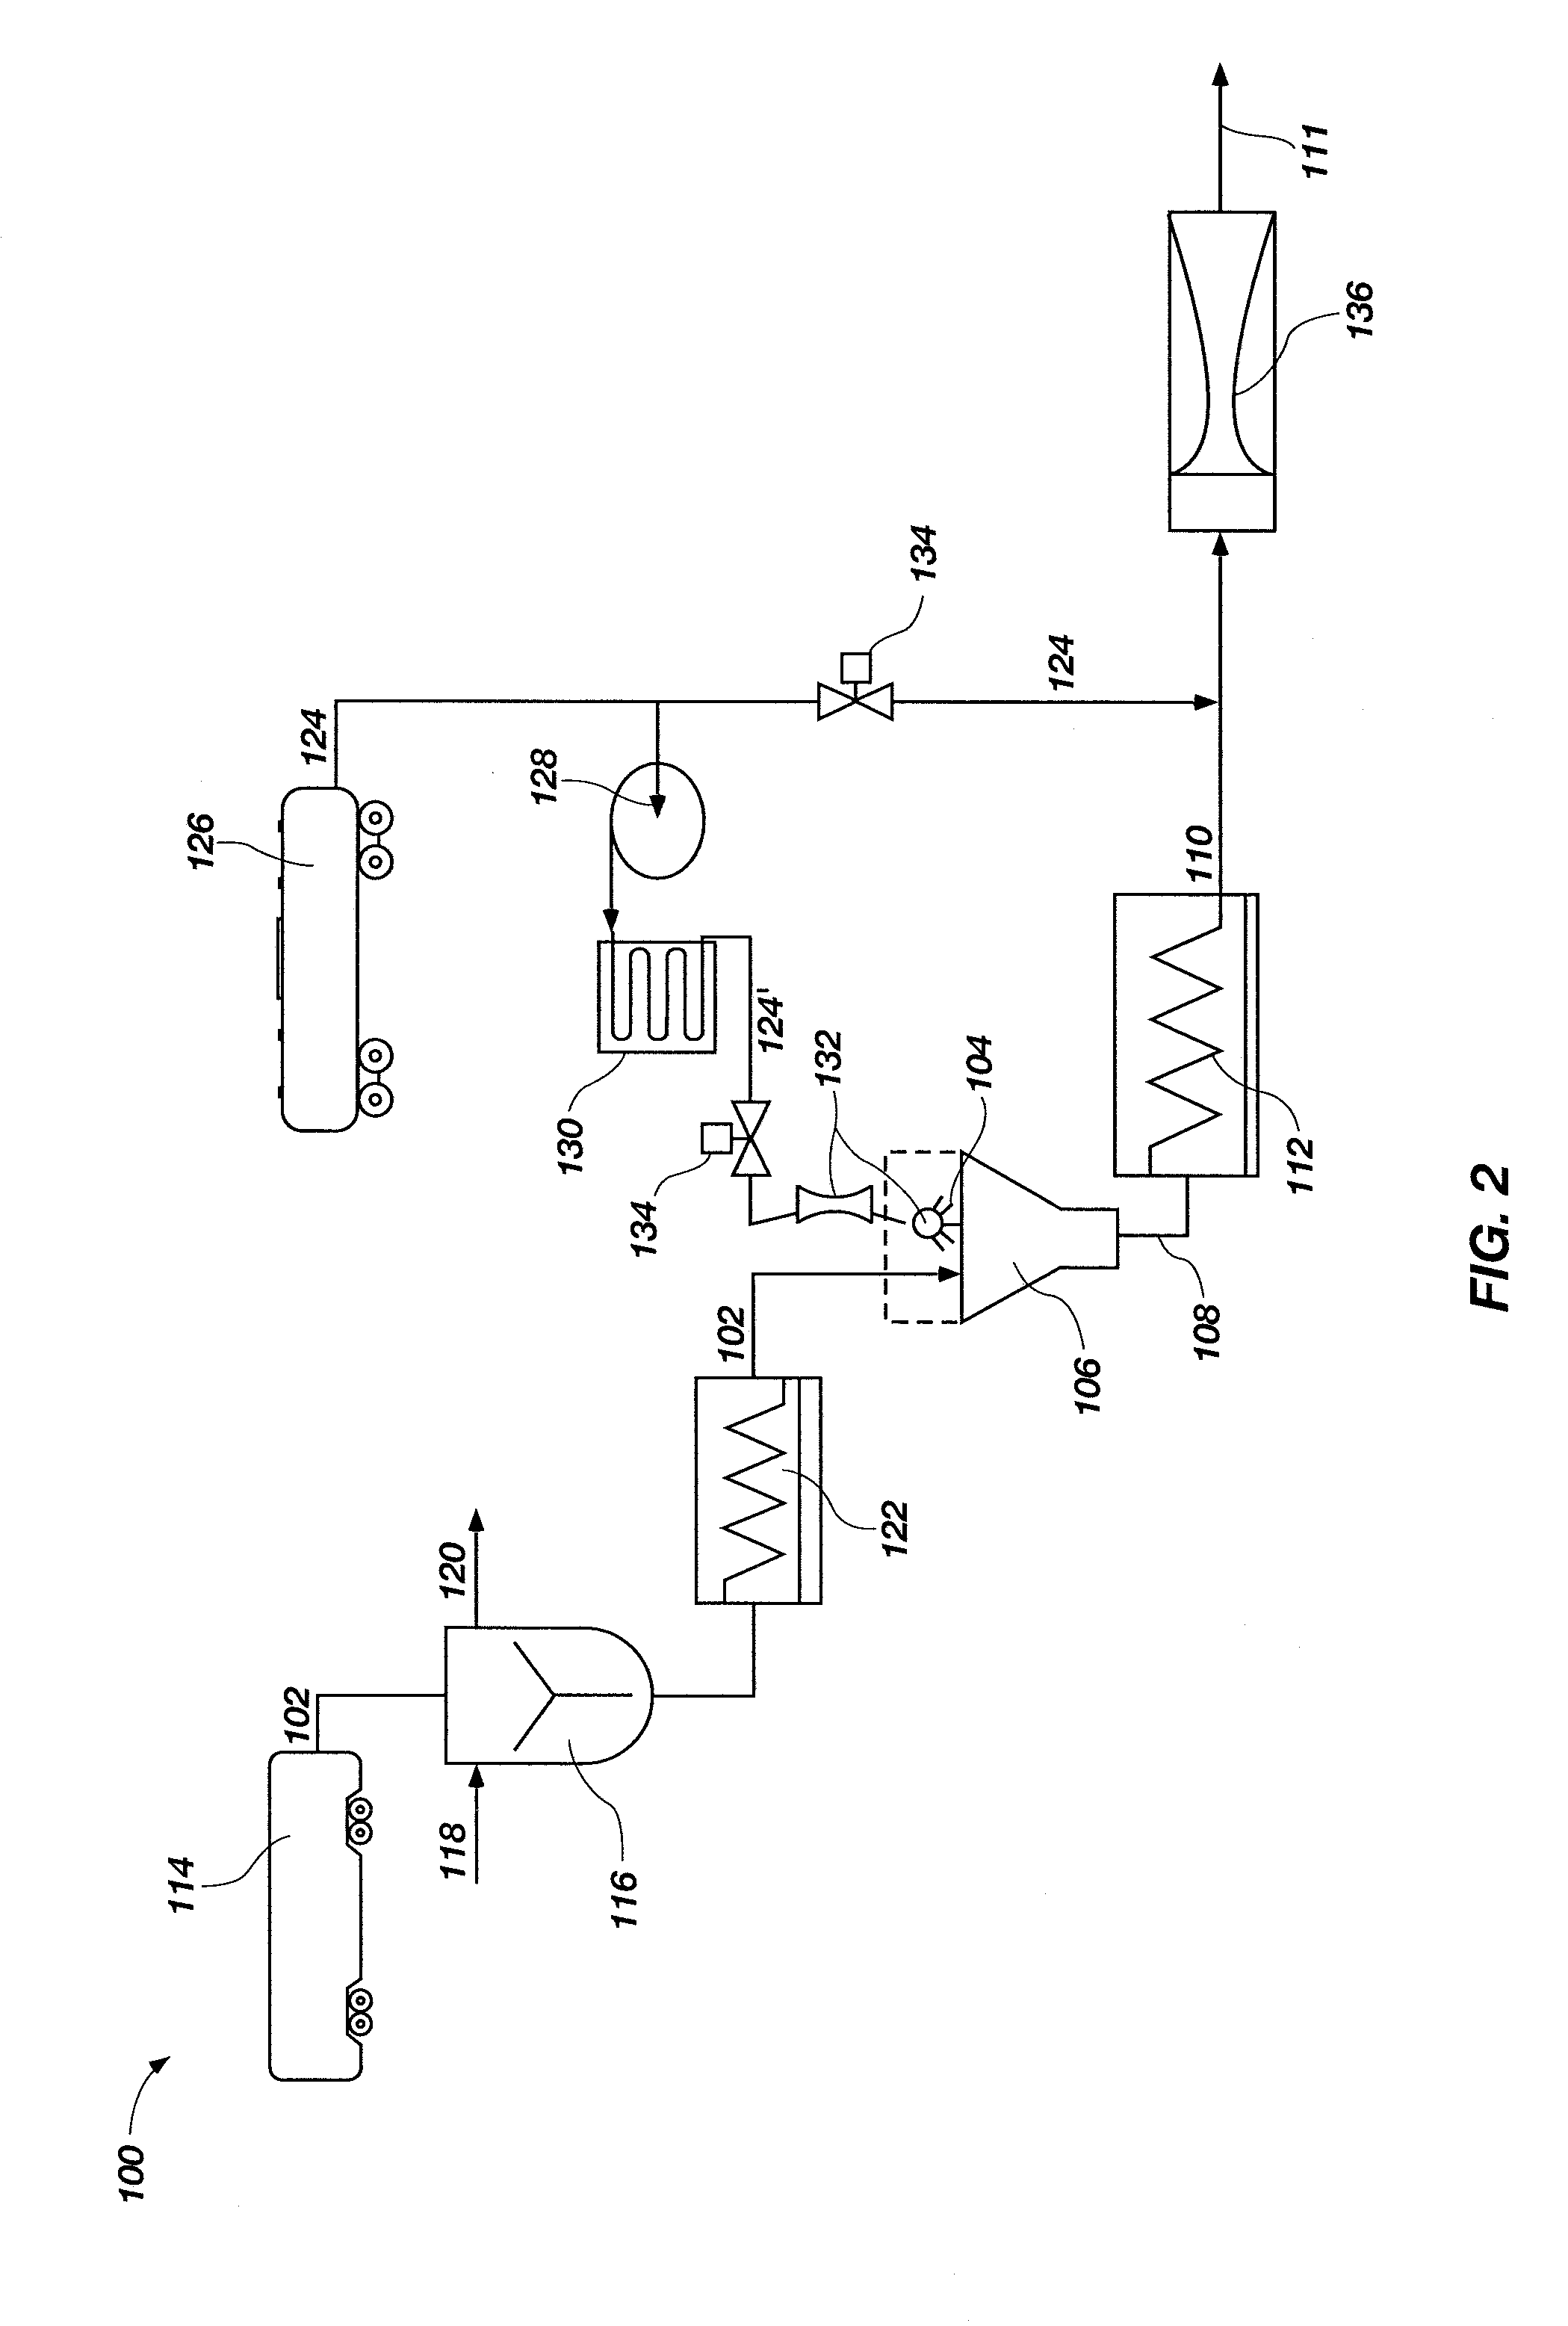 Method and System for Continuously Pumping a Solid Material and Method and System for Hydrogen Formation